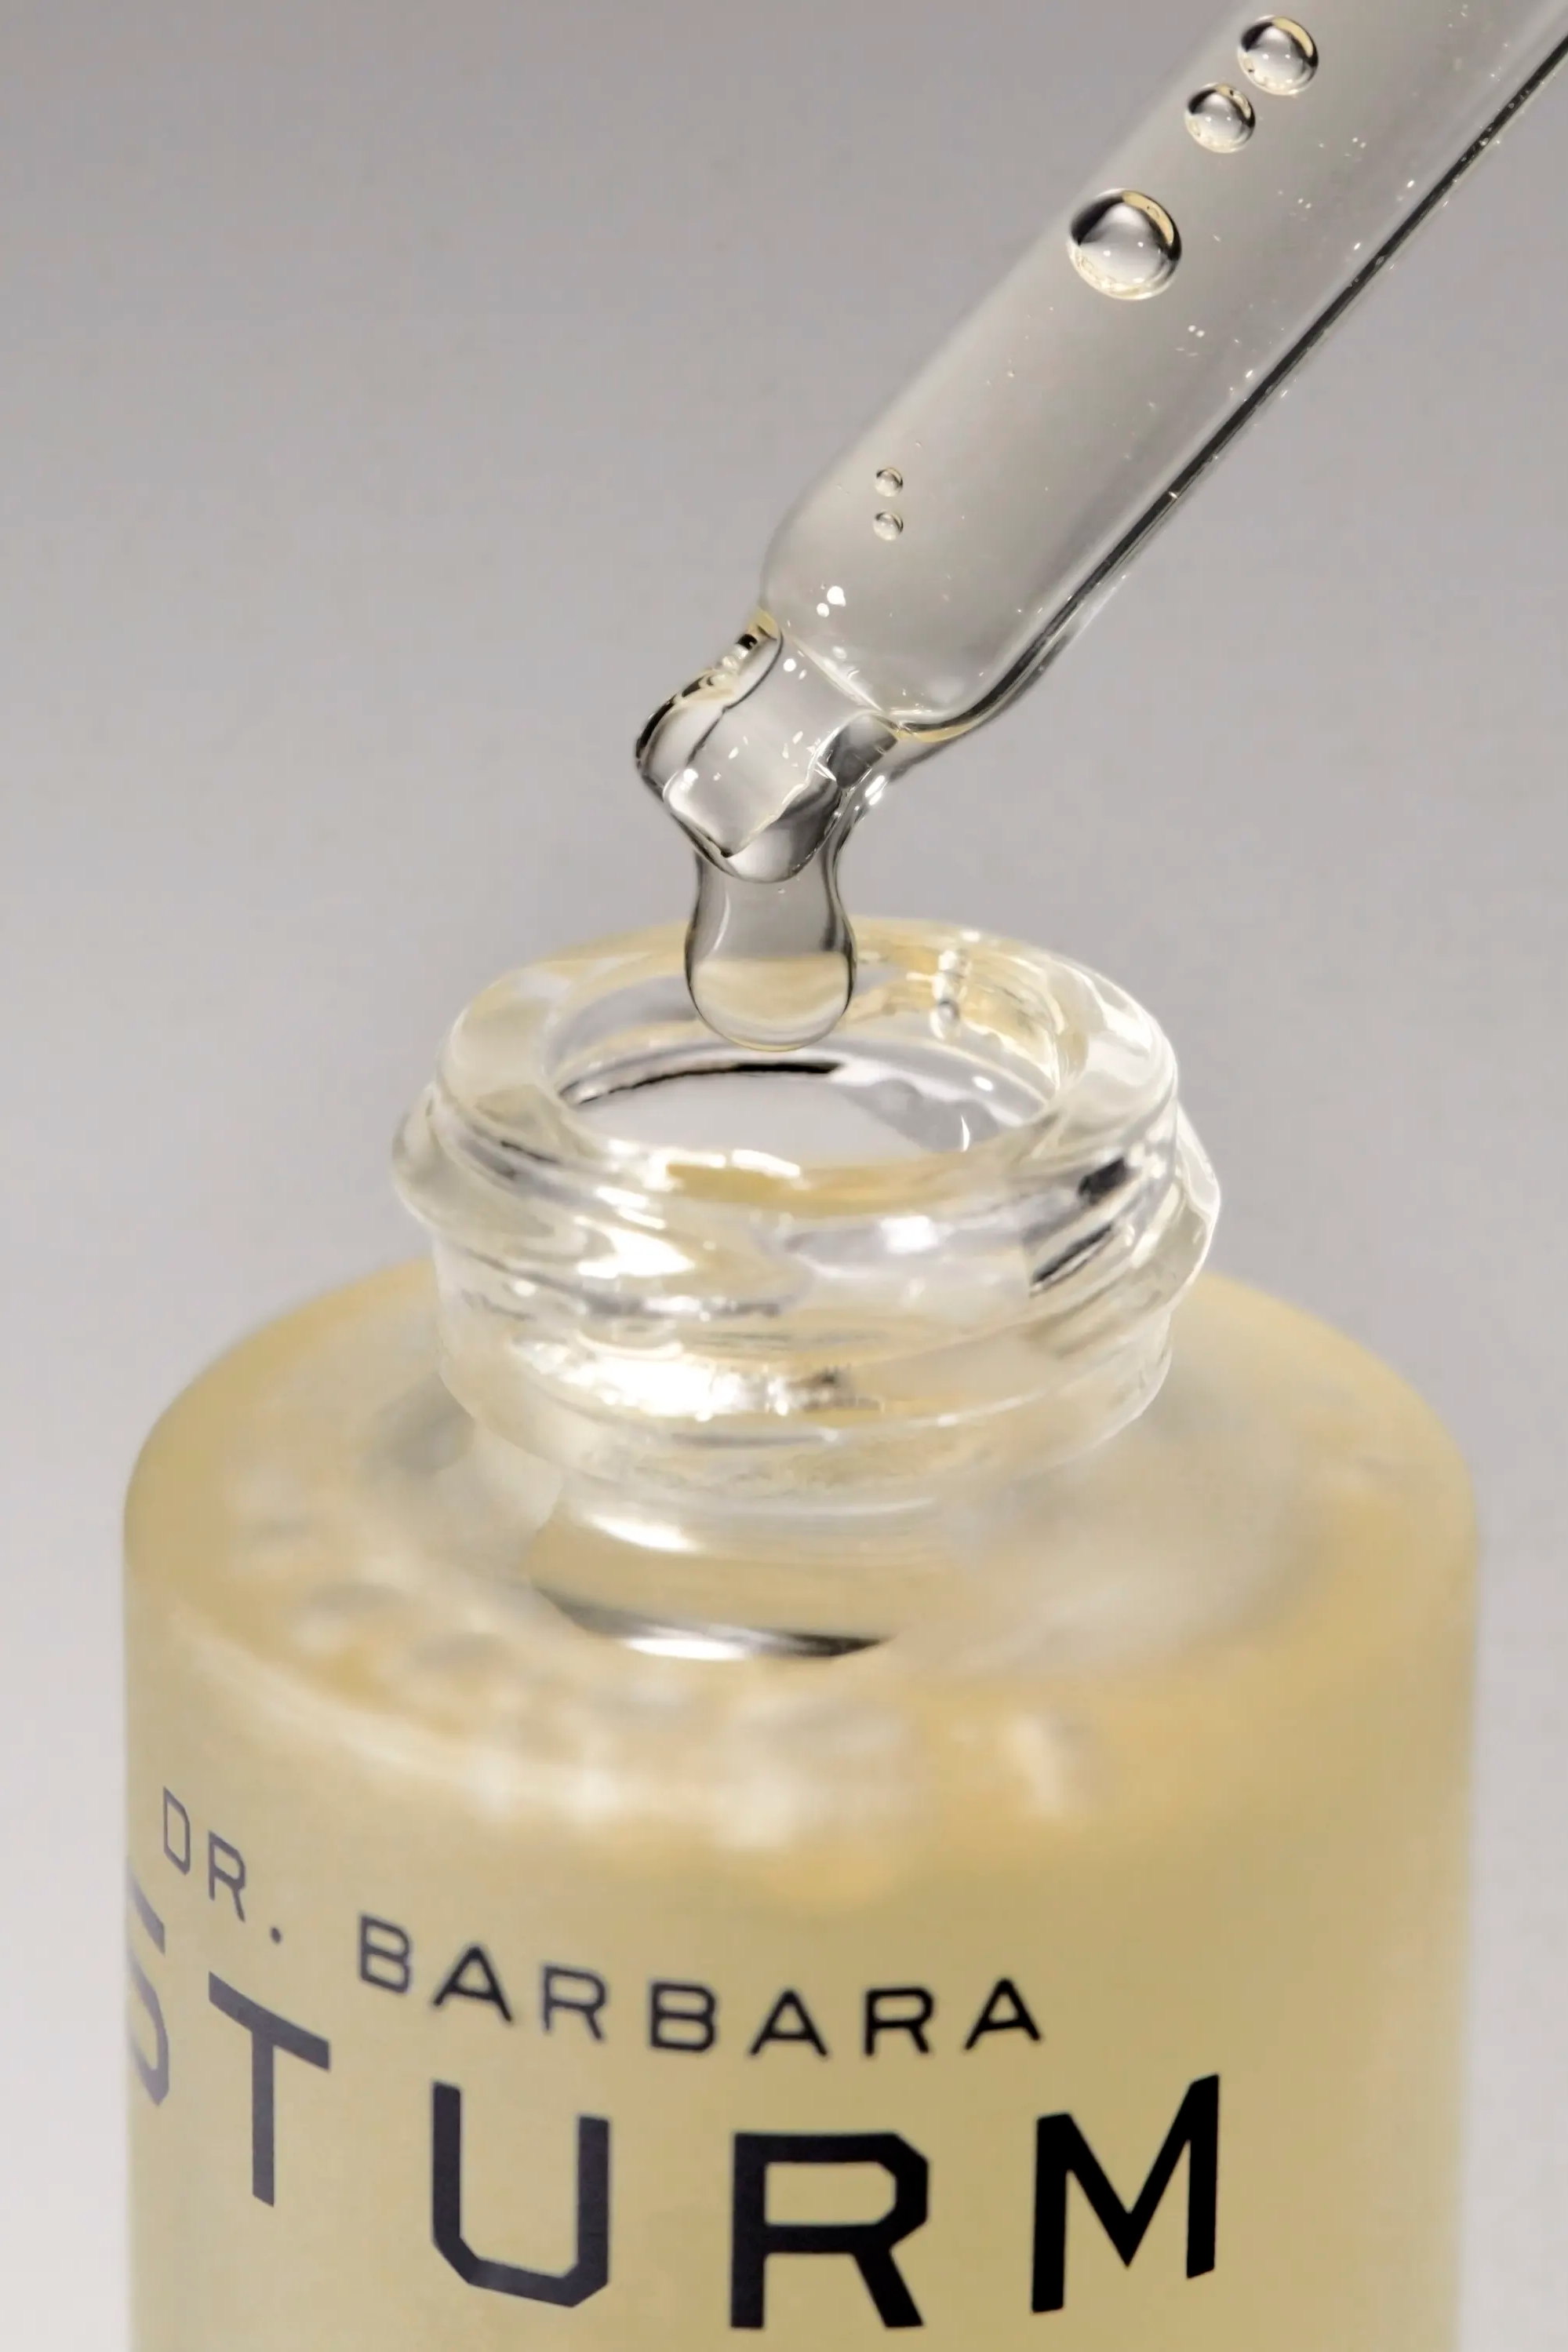 Super anti-aging serum with pipette